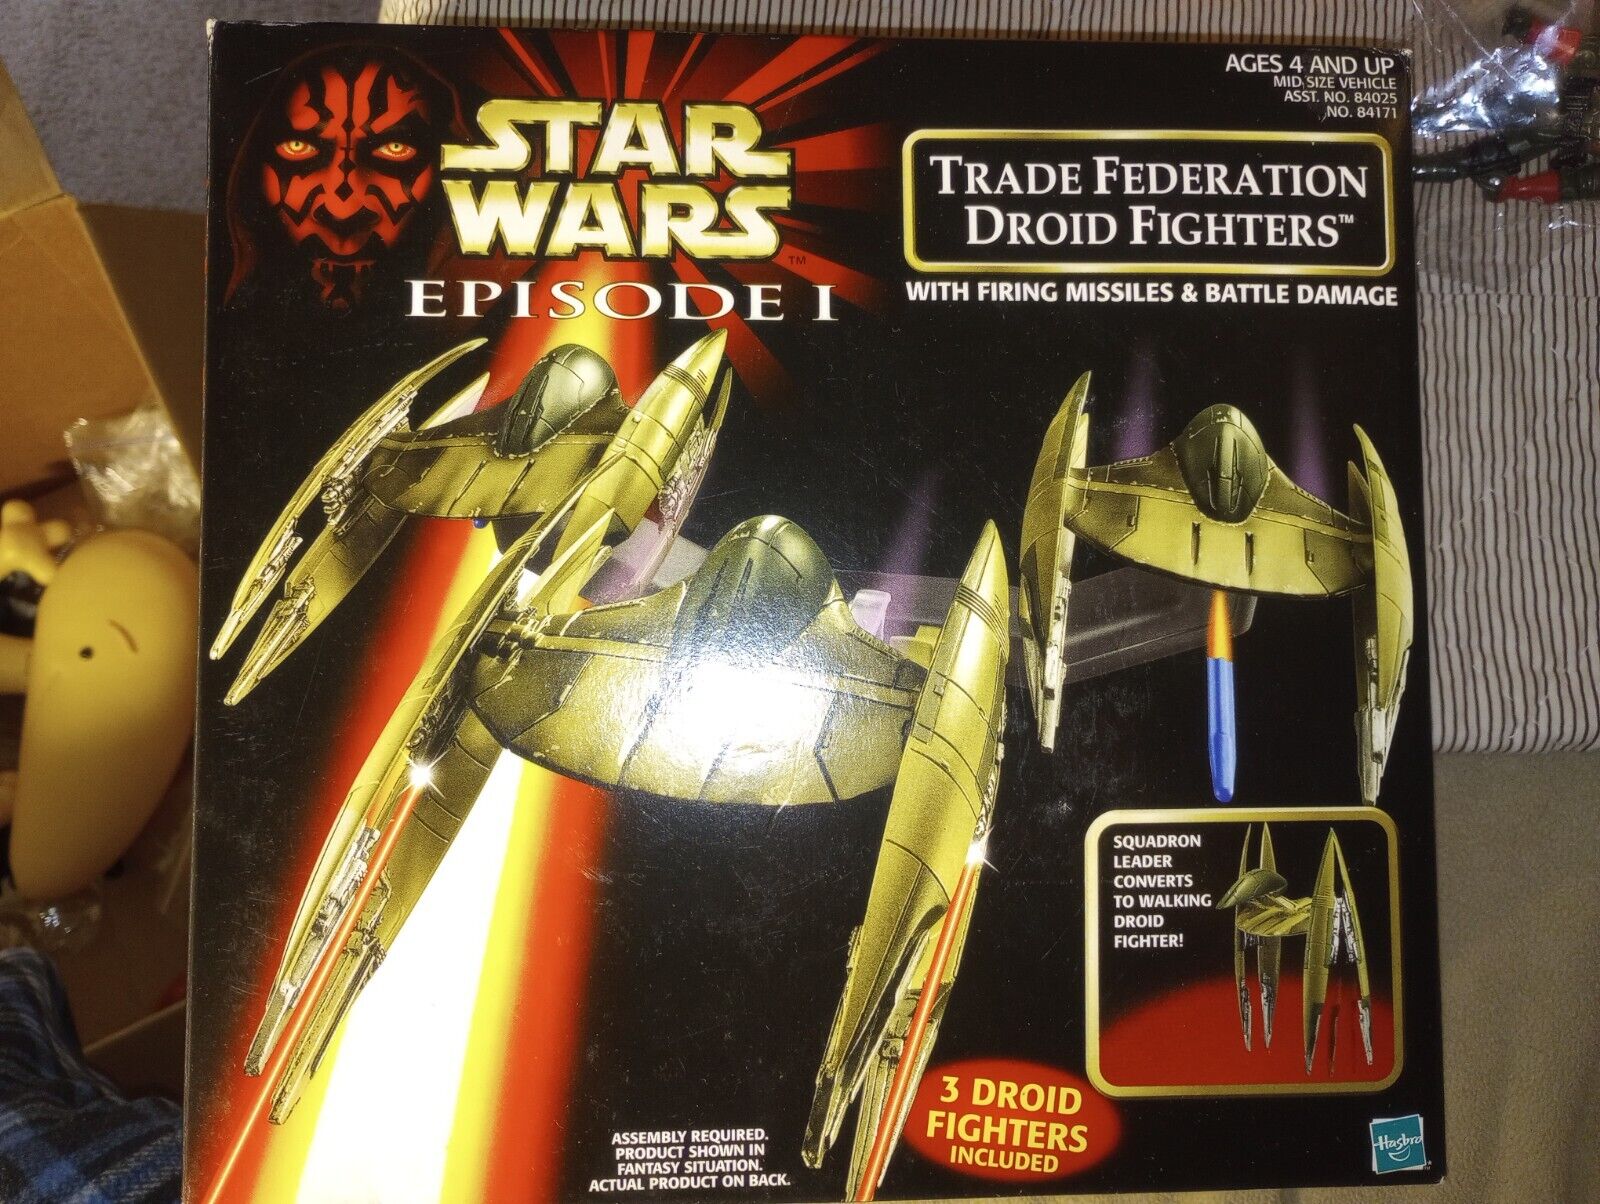 STAR WARS TRADE FEDERATION DROID FIGHTERS EPISODE 1 FIRE MISSILES NABOO 1998